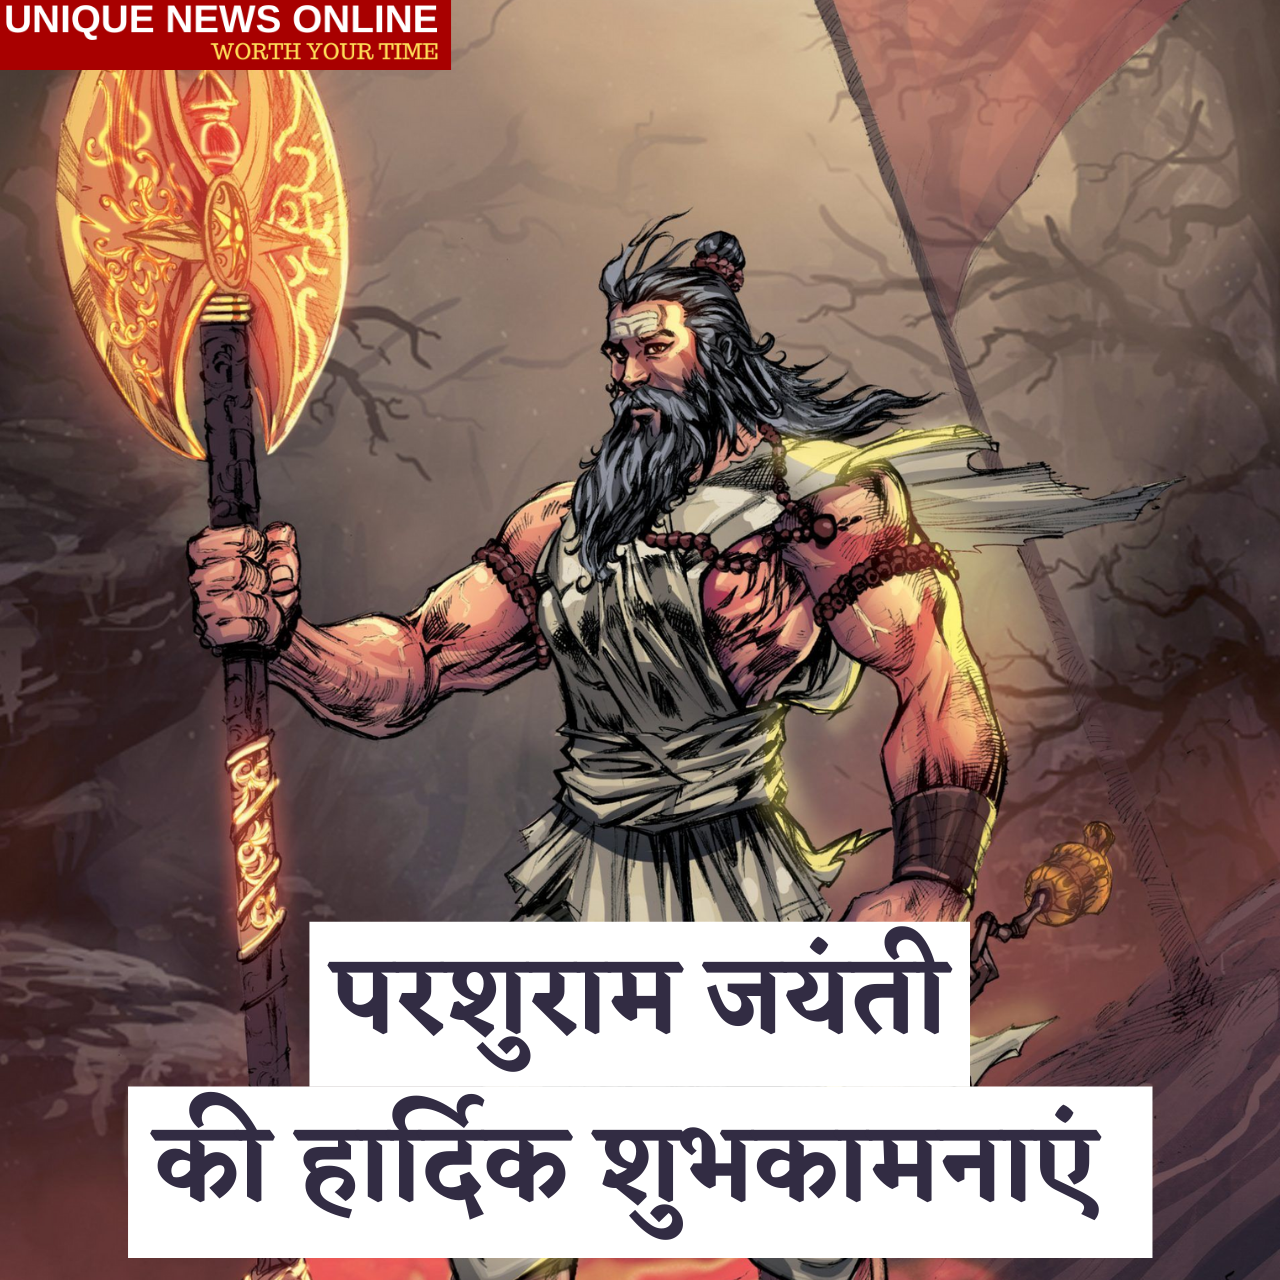 Parshuram Jayanti 2021 Wishes in Hindi, Images, Banner, WhatsApp Status, Greetings, Quotes, and SMS to share